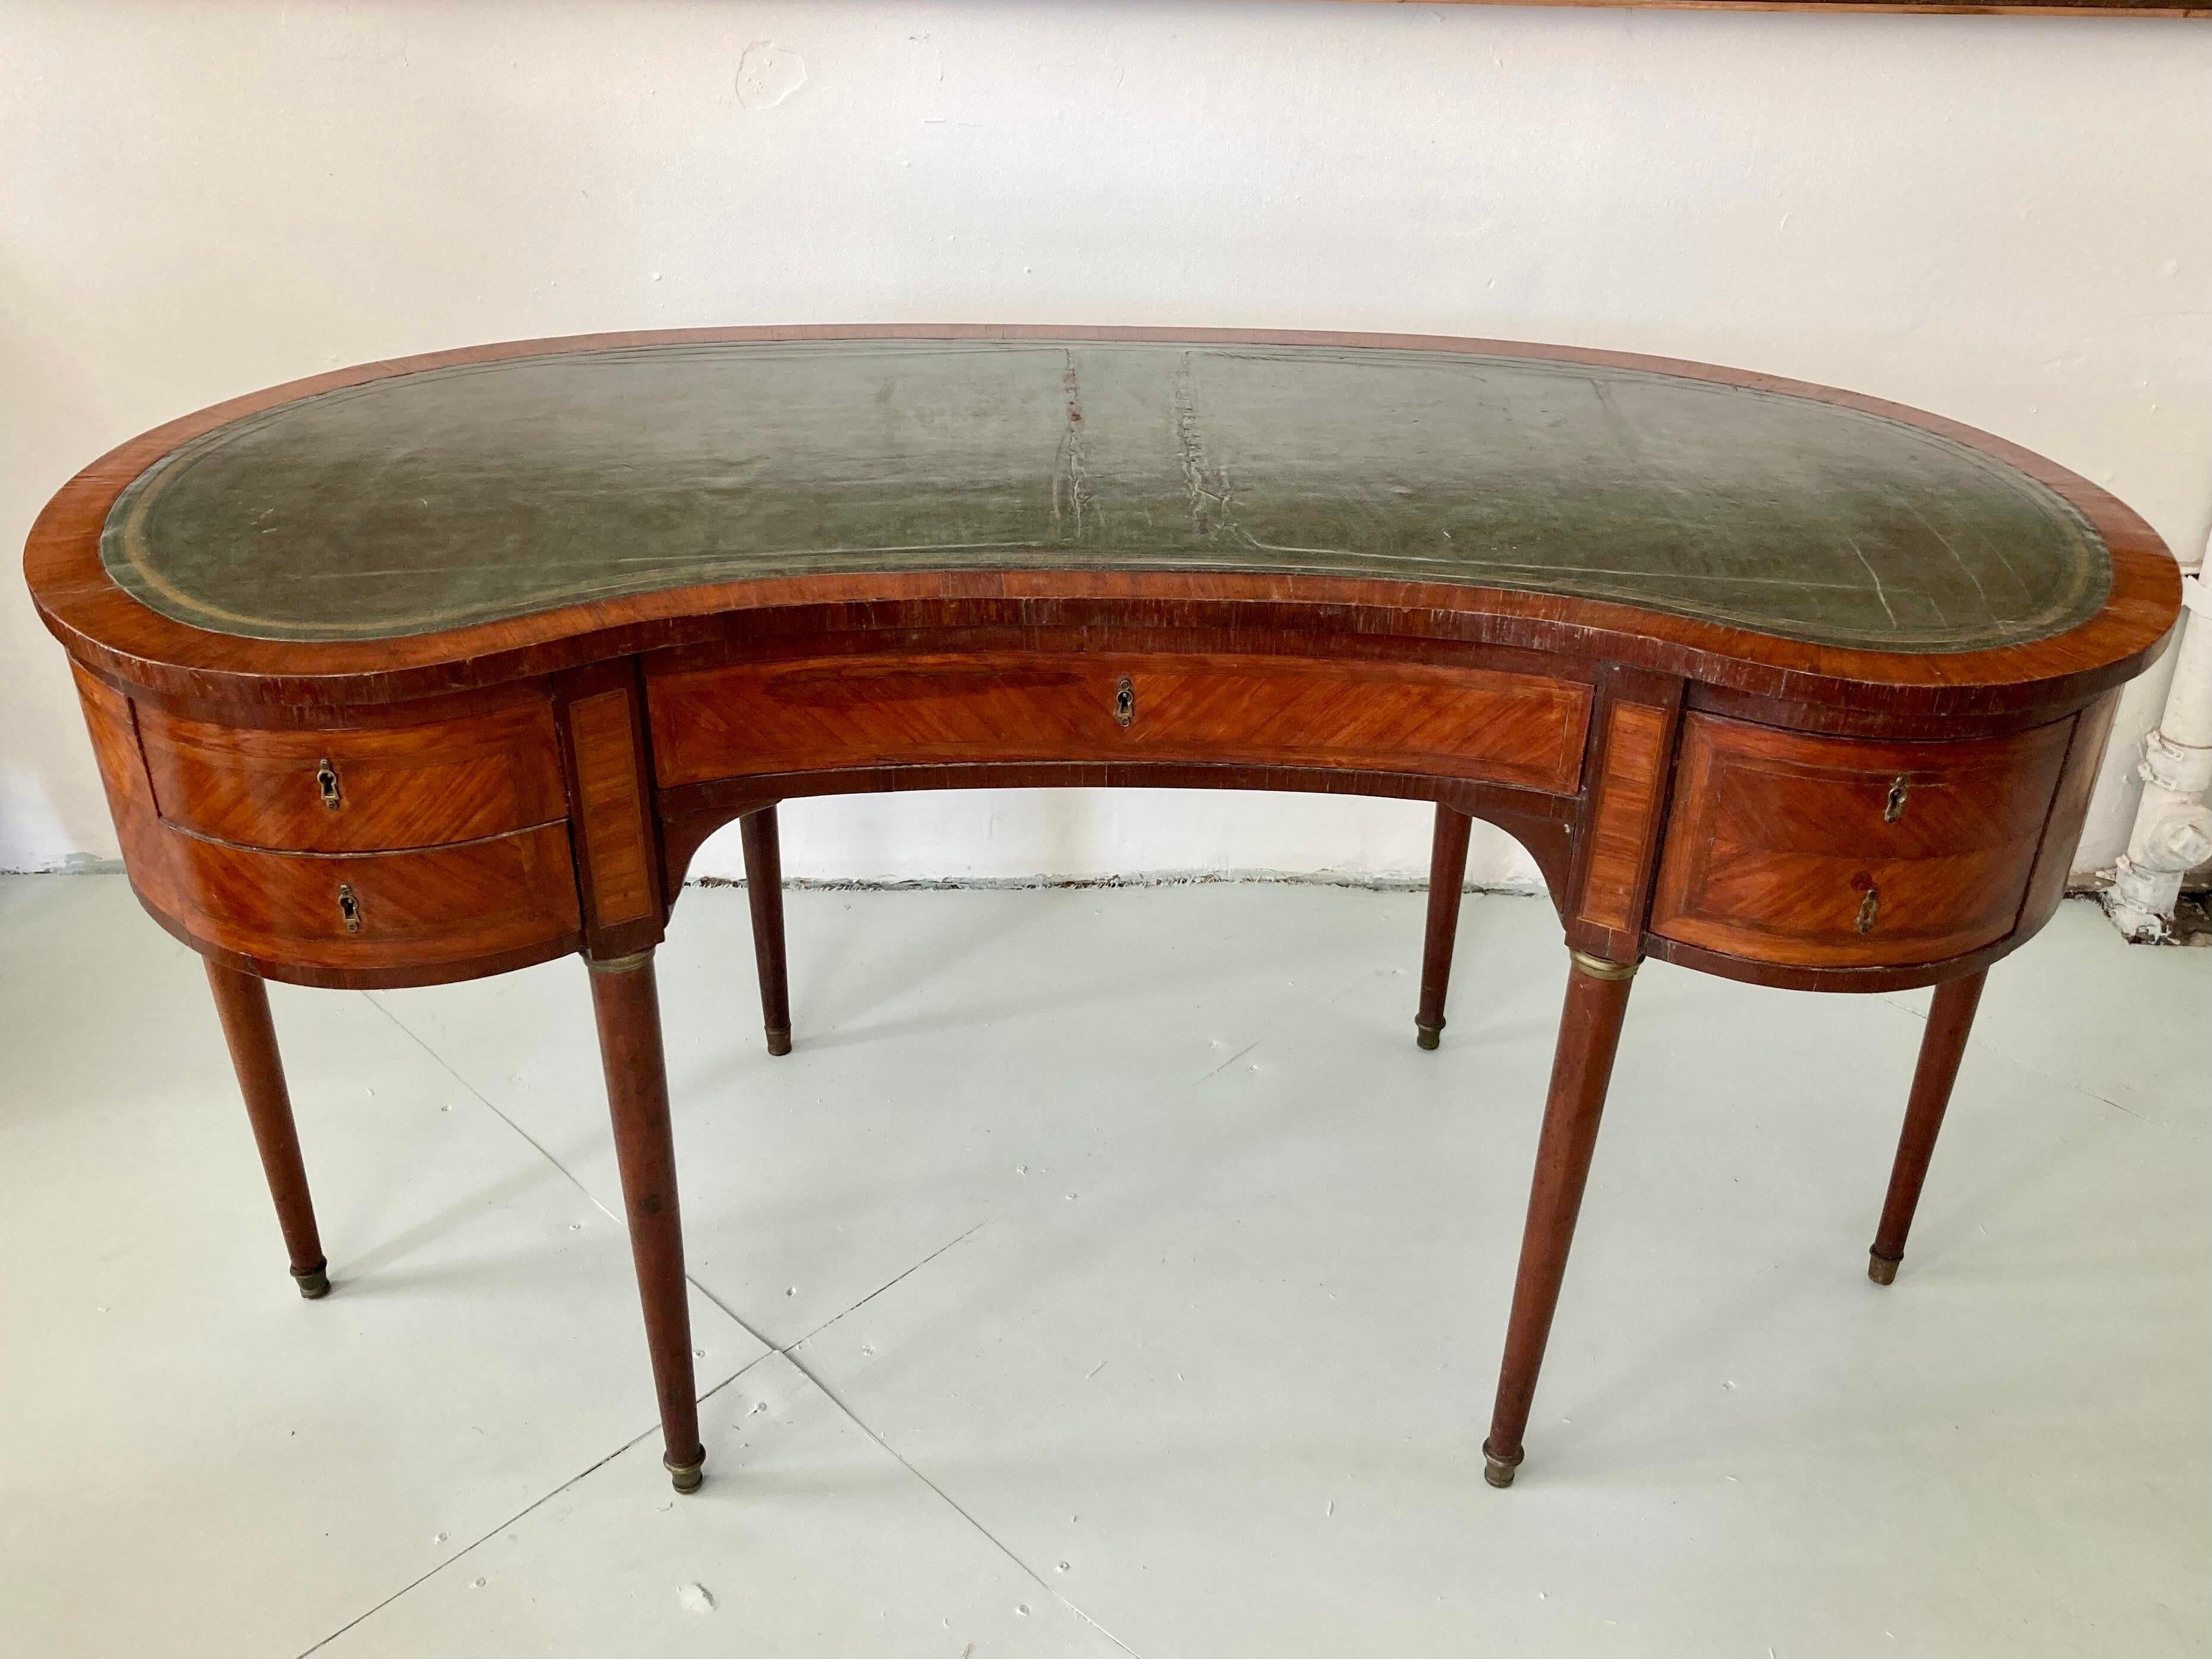 Vintage French directoire desk. Wonderful shape with inset green leather top. Great storage too. Add some French Architecture to your home.